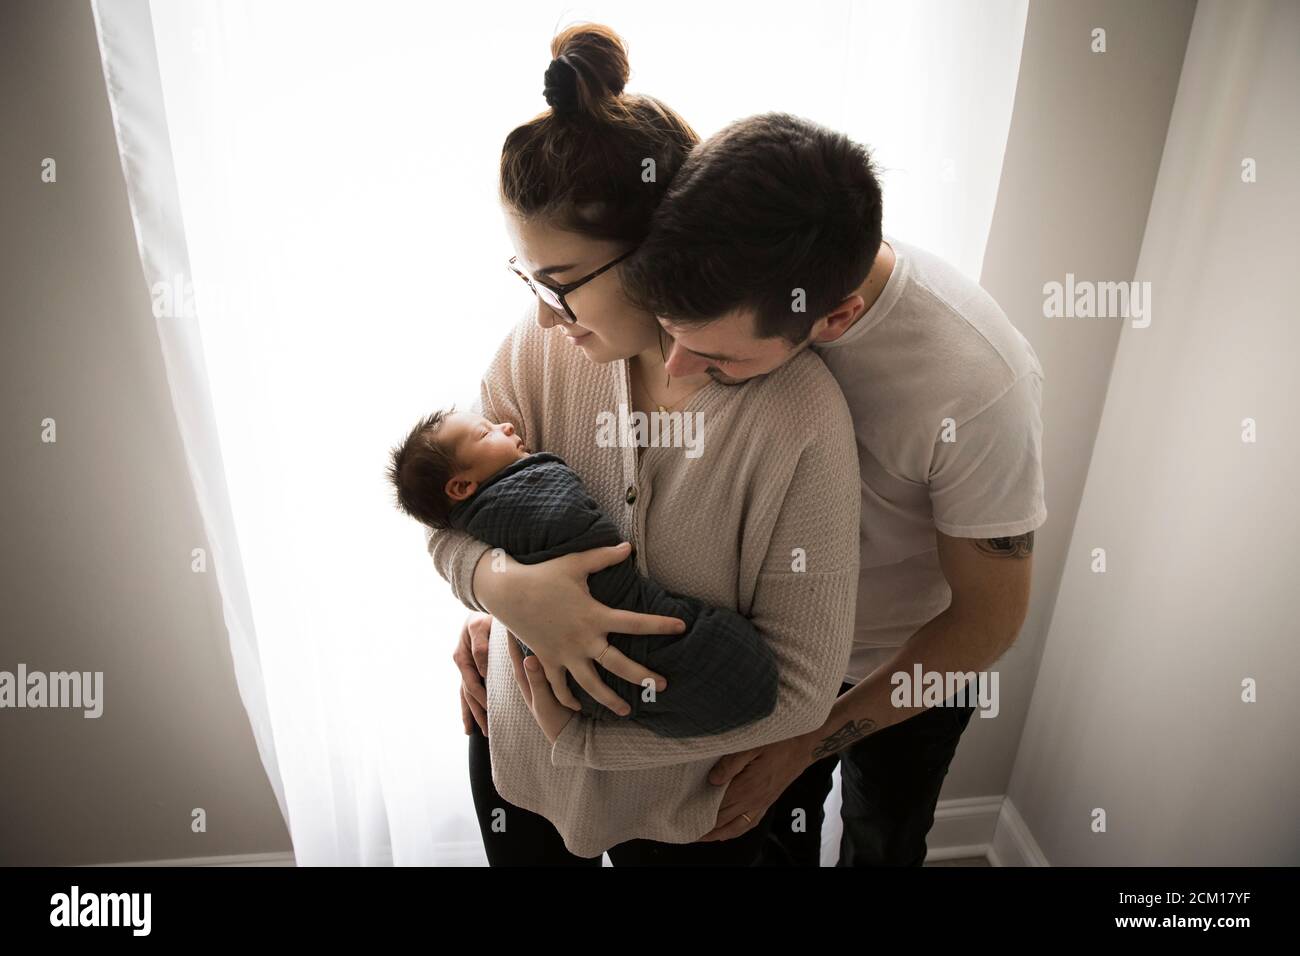 Gen Z Parents Snuggle by Window and Admire Their Newborn Baby Stock Photo